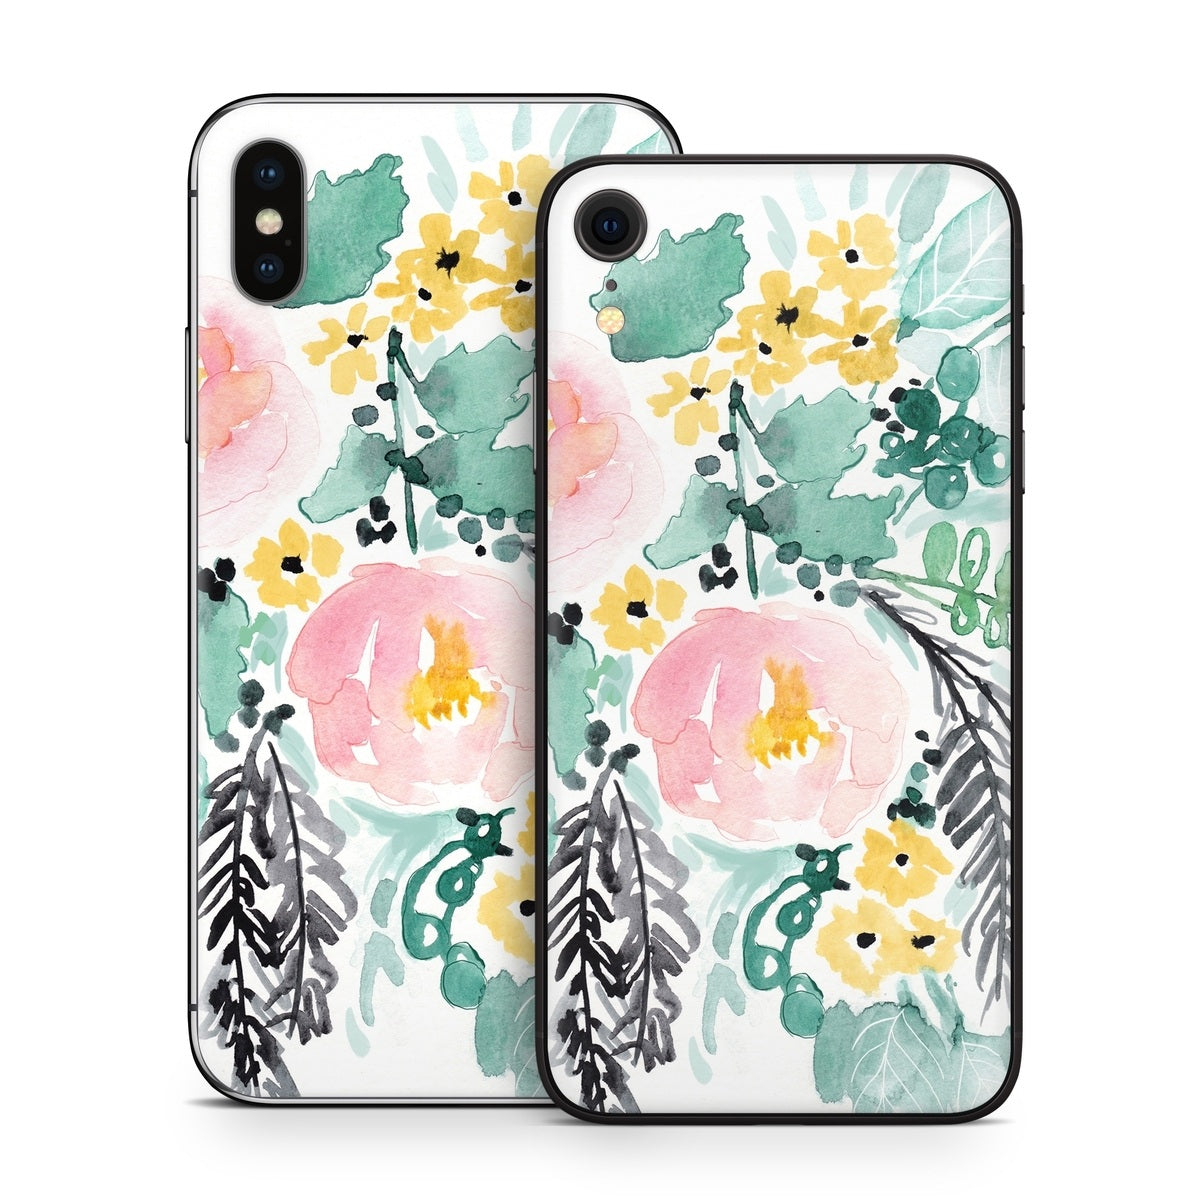 Blushed Flowers - Apple iPhone X Skin